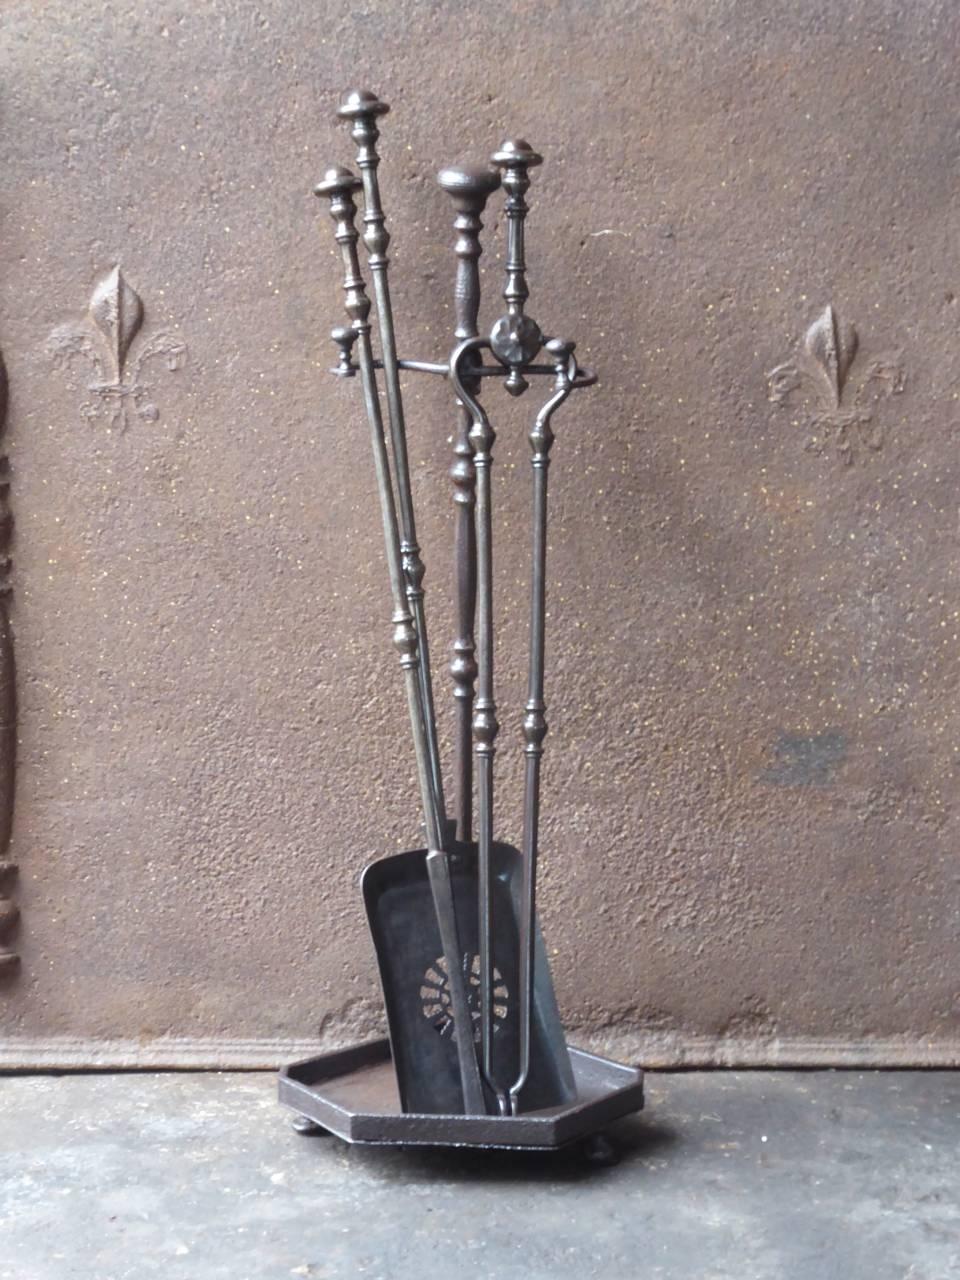 19th century English Victorian fireplace tool set - fire tools made of wrought iron.

We have a unique and specialized collection of antique and used fireplace accessories consisting of more than 1000 listings at 1stdibs. Amongst others, we always